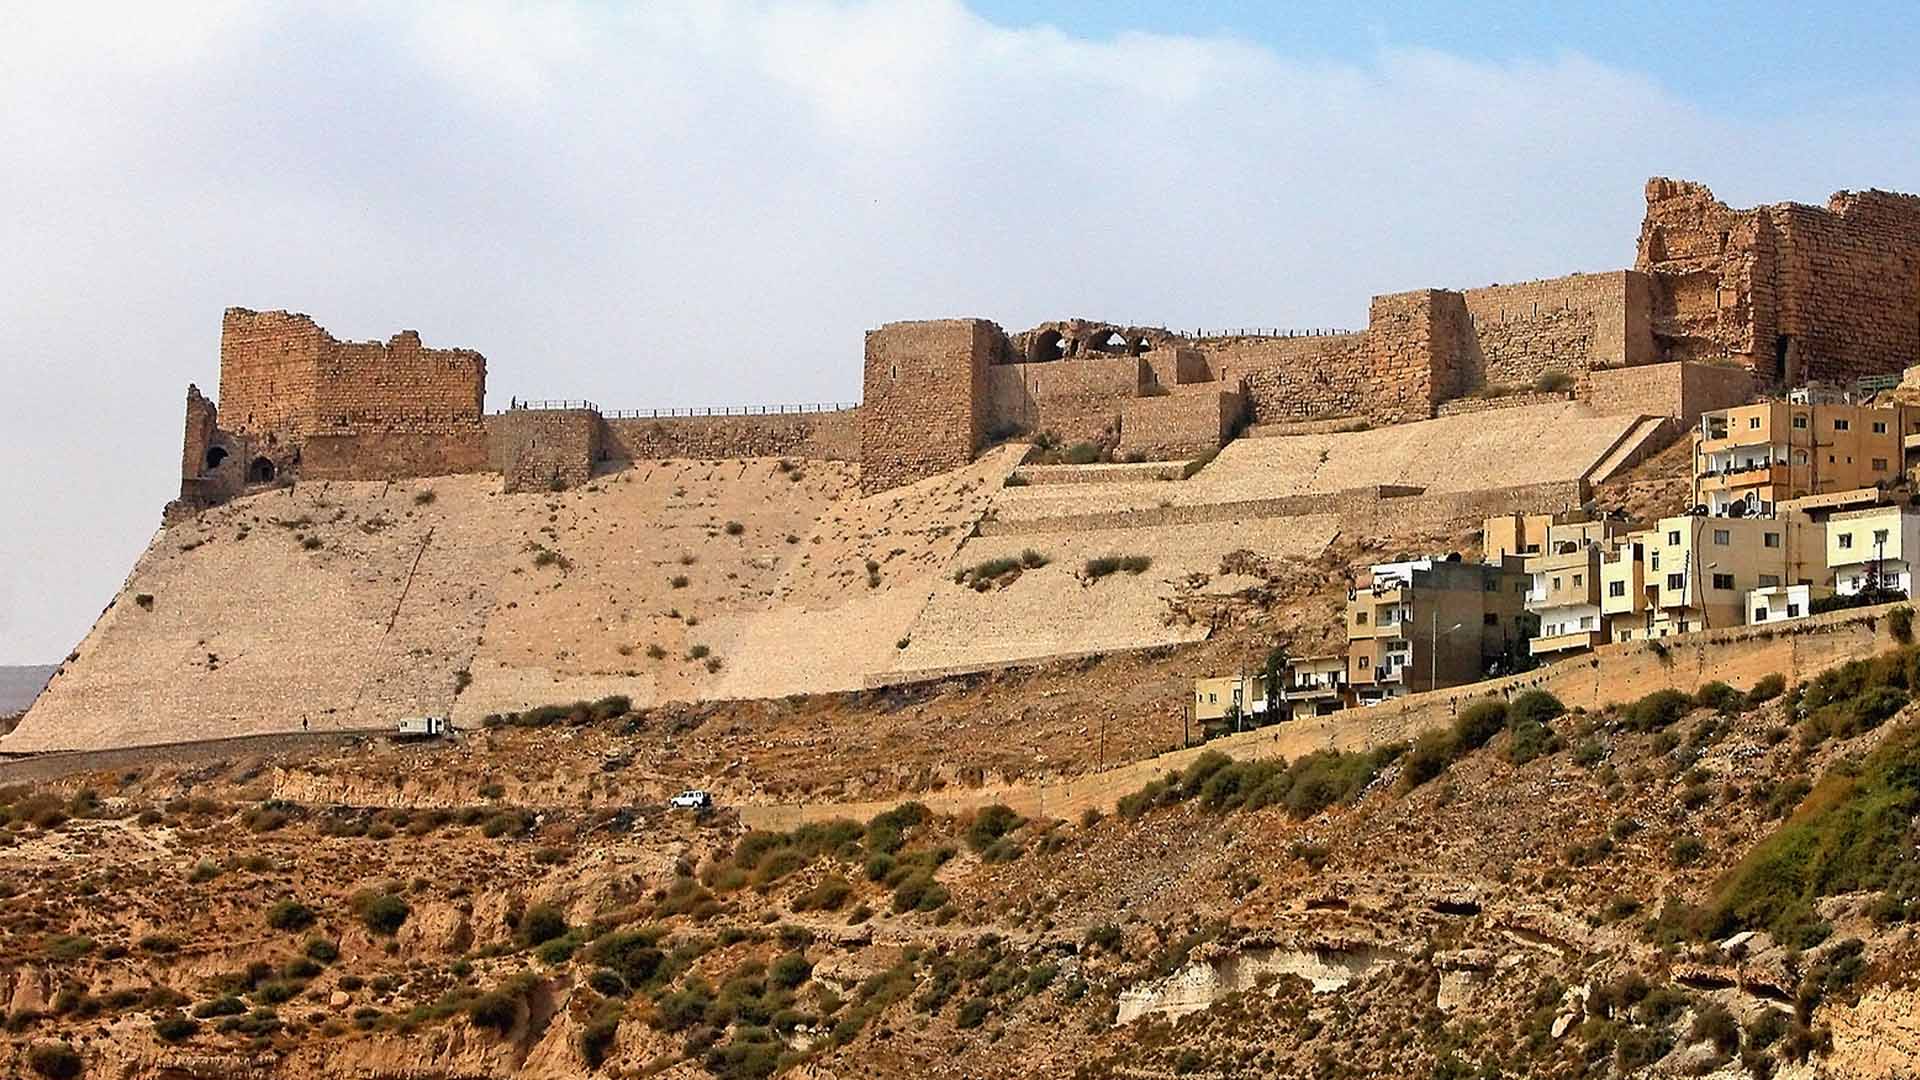 A panoramic photograph immortalizes the formidable Kerak Castle, an imposing fortress from the time of the Crusaders.